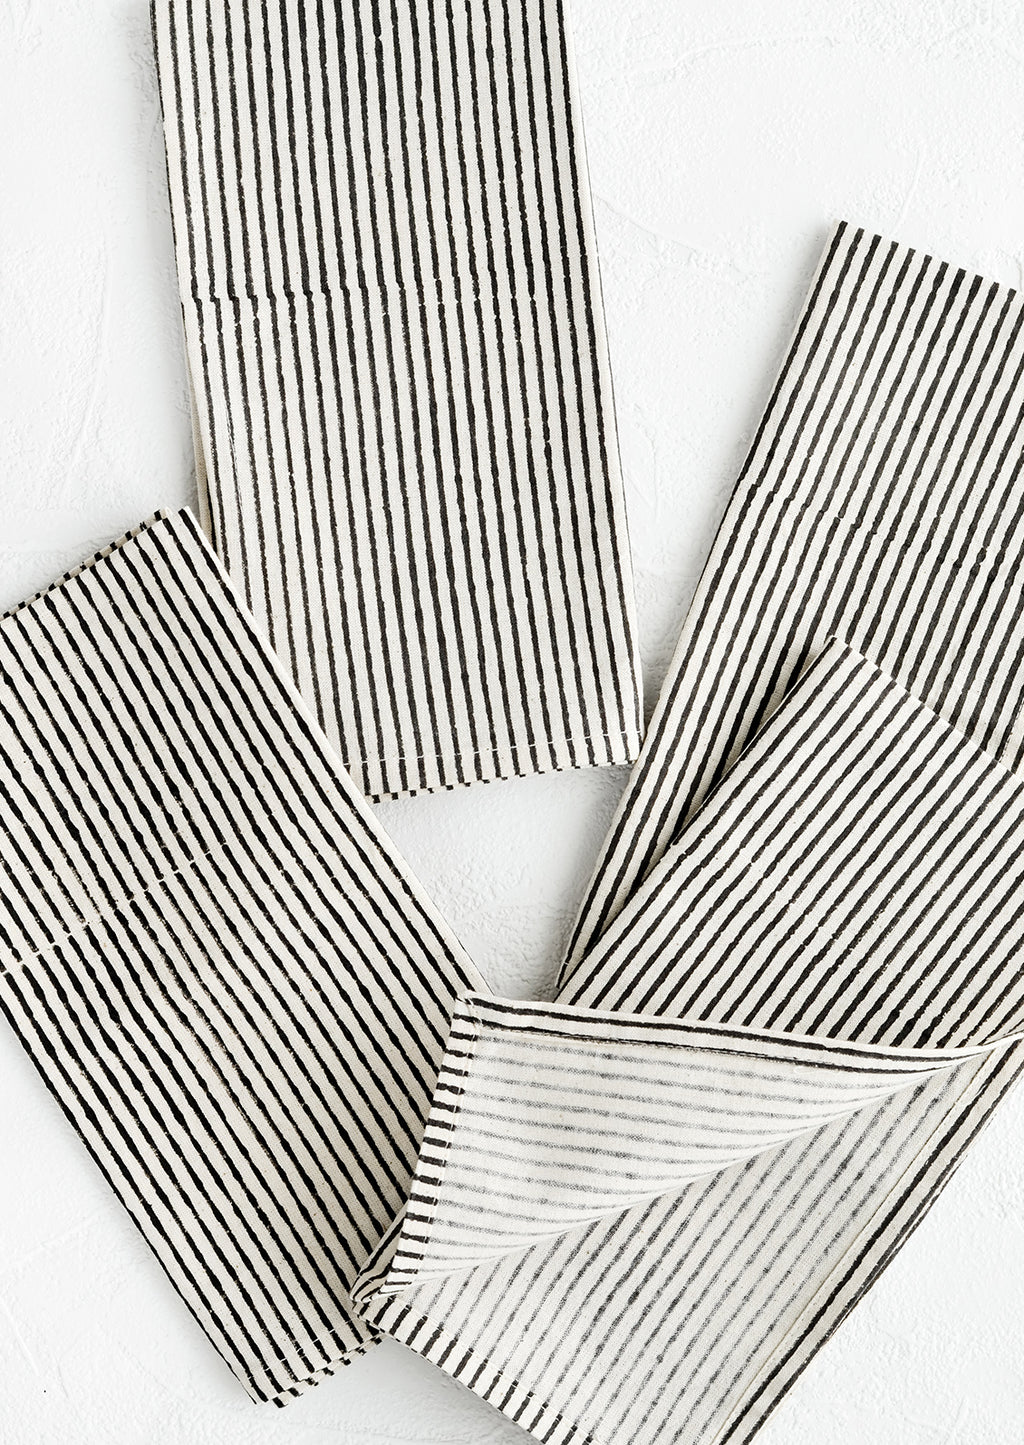 1: Scattered folded fabric napkins in natural cotton with hand-drawn line pattern in black.